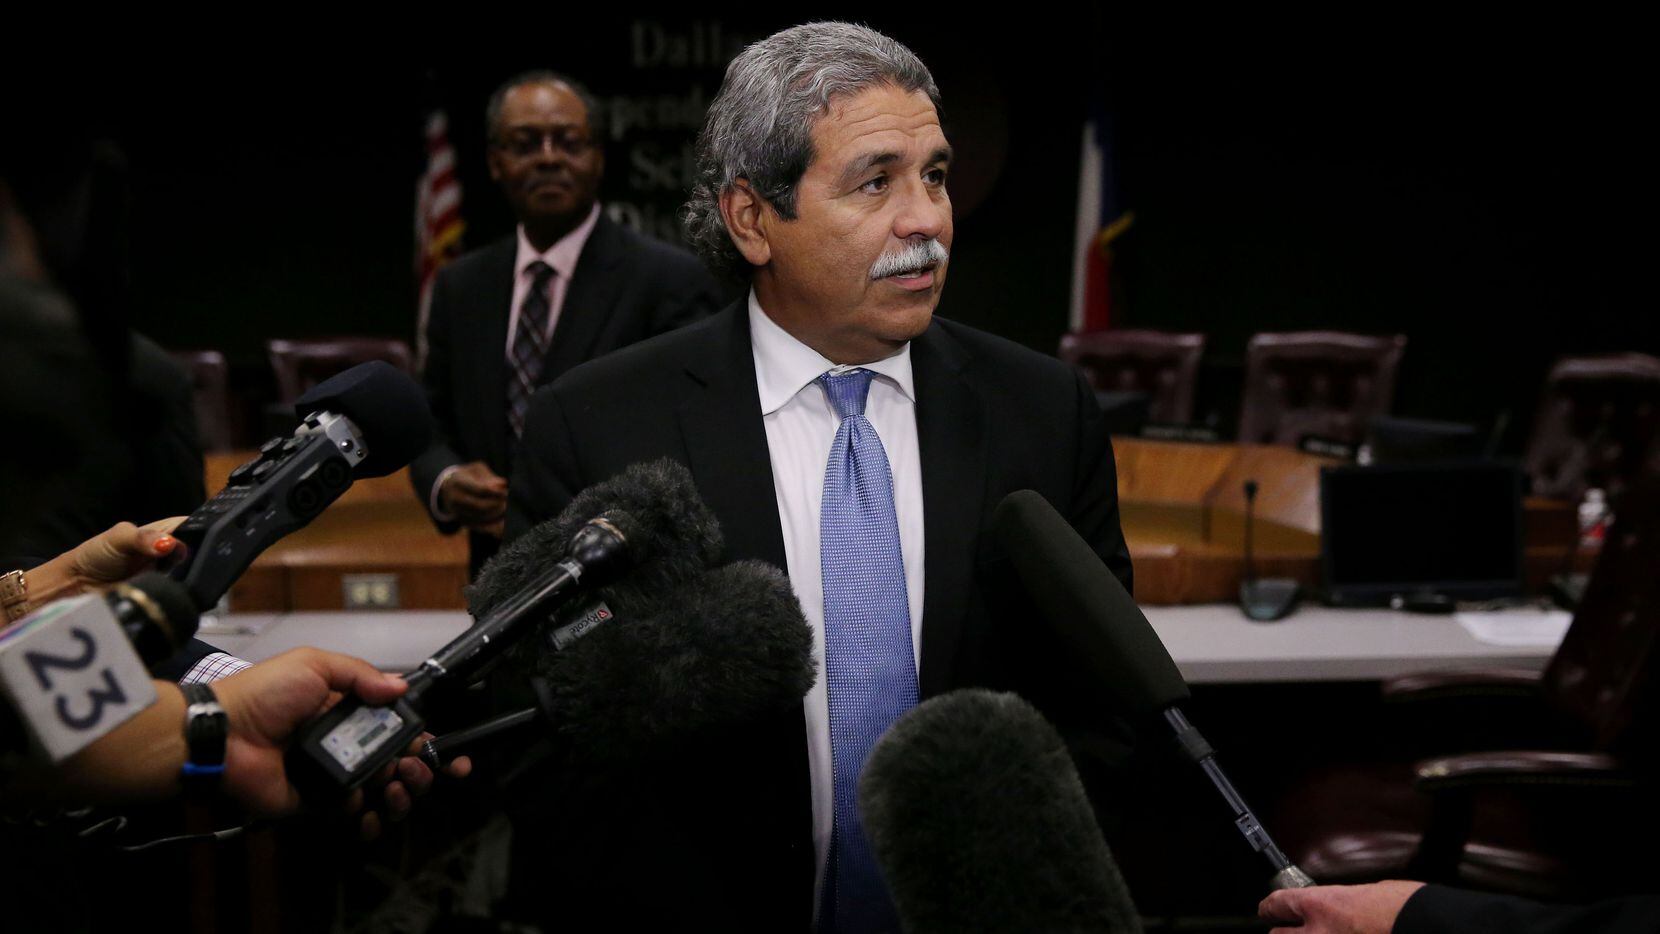  Superintendent Michael Hinojosa spoke to media after he was voted in as superintendent at a...